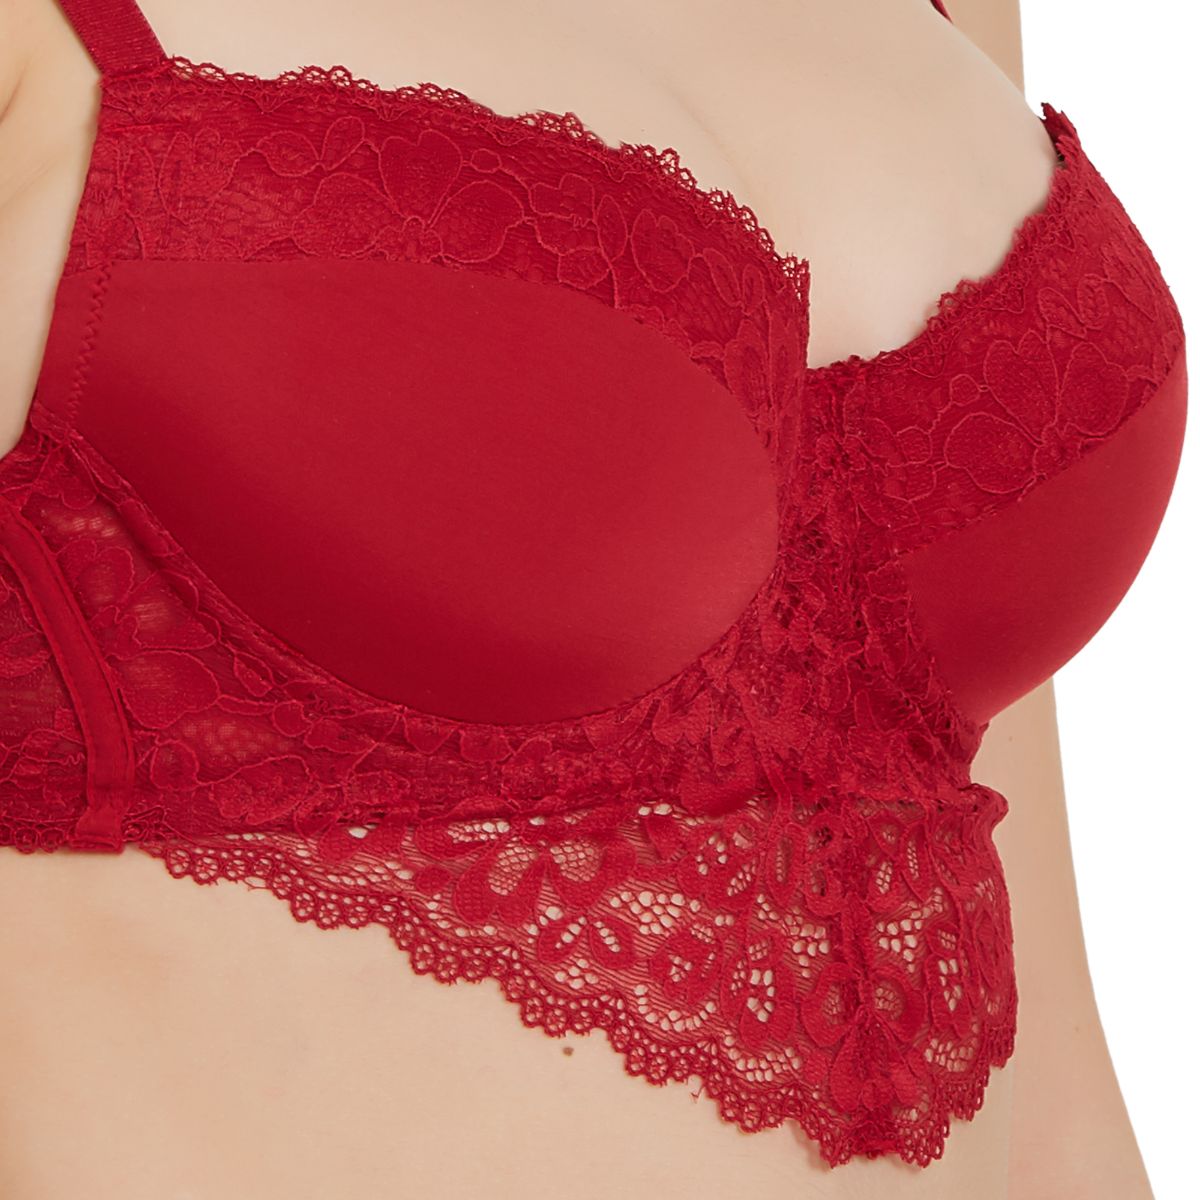 Semi/Medium Coverage Padded Wired Lace Demi Cup Bra (Pack Of 2) FB-546